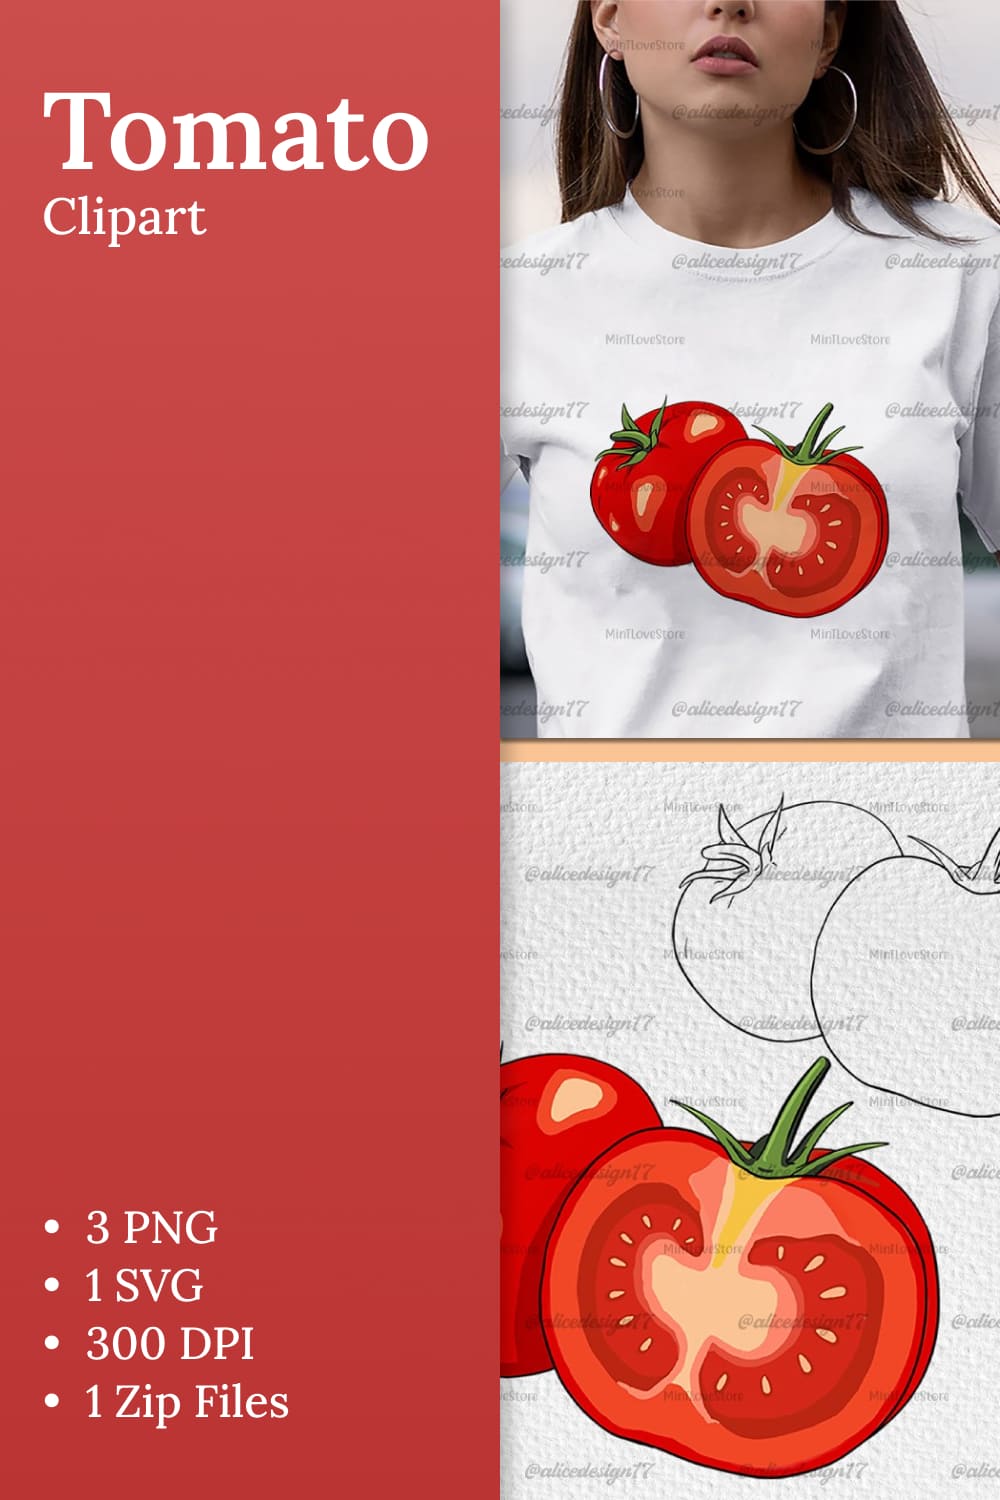 Tomato clipart vegetable clipart - pinterest image preview.